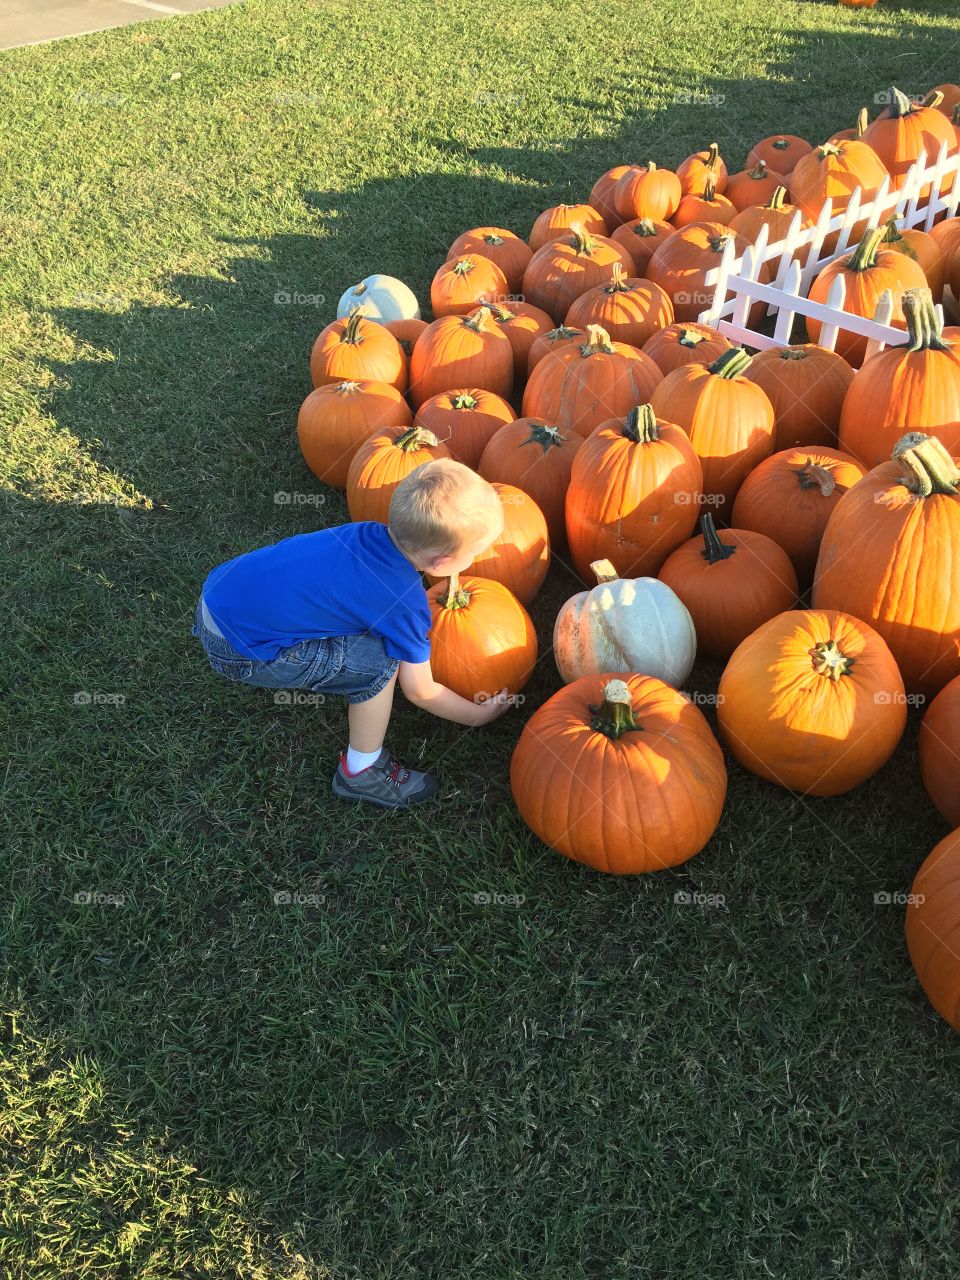 Pumpkin patch . Me and my son at the local pumpkin patch